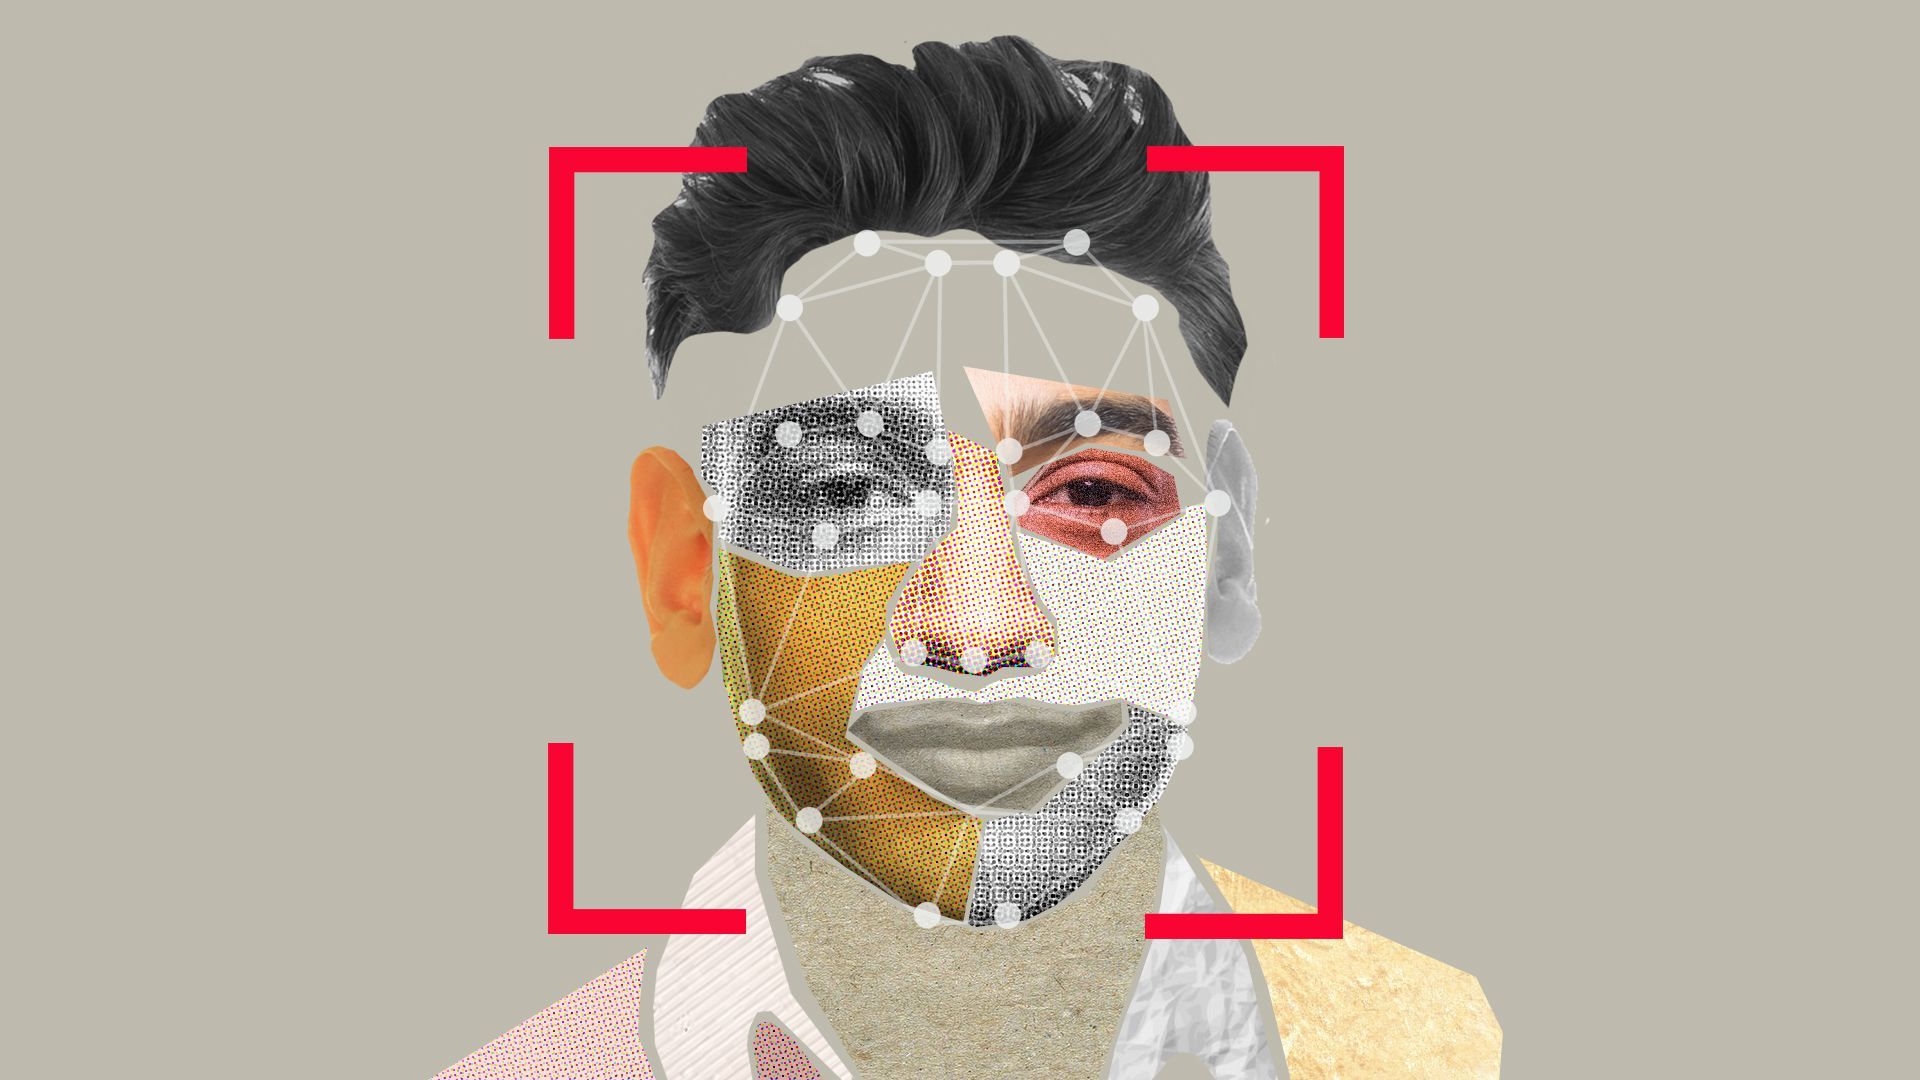 A man's face geometrically segmented with some portions highlighted